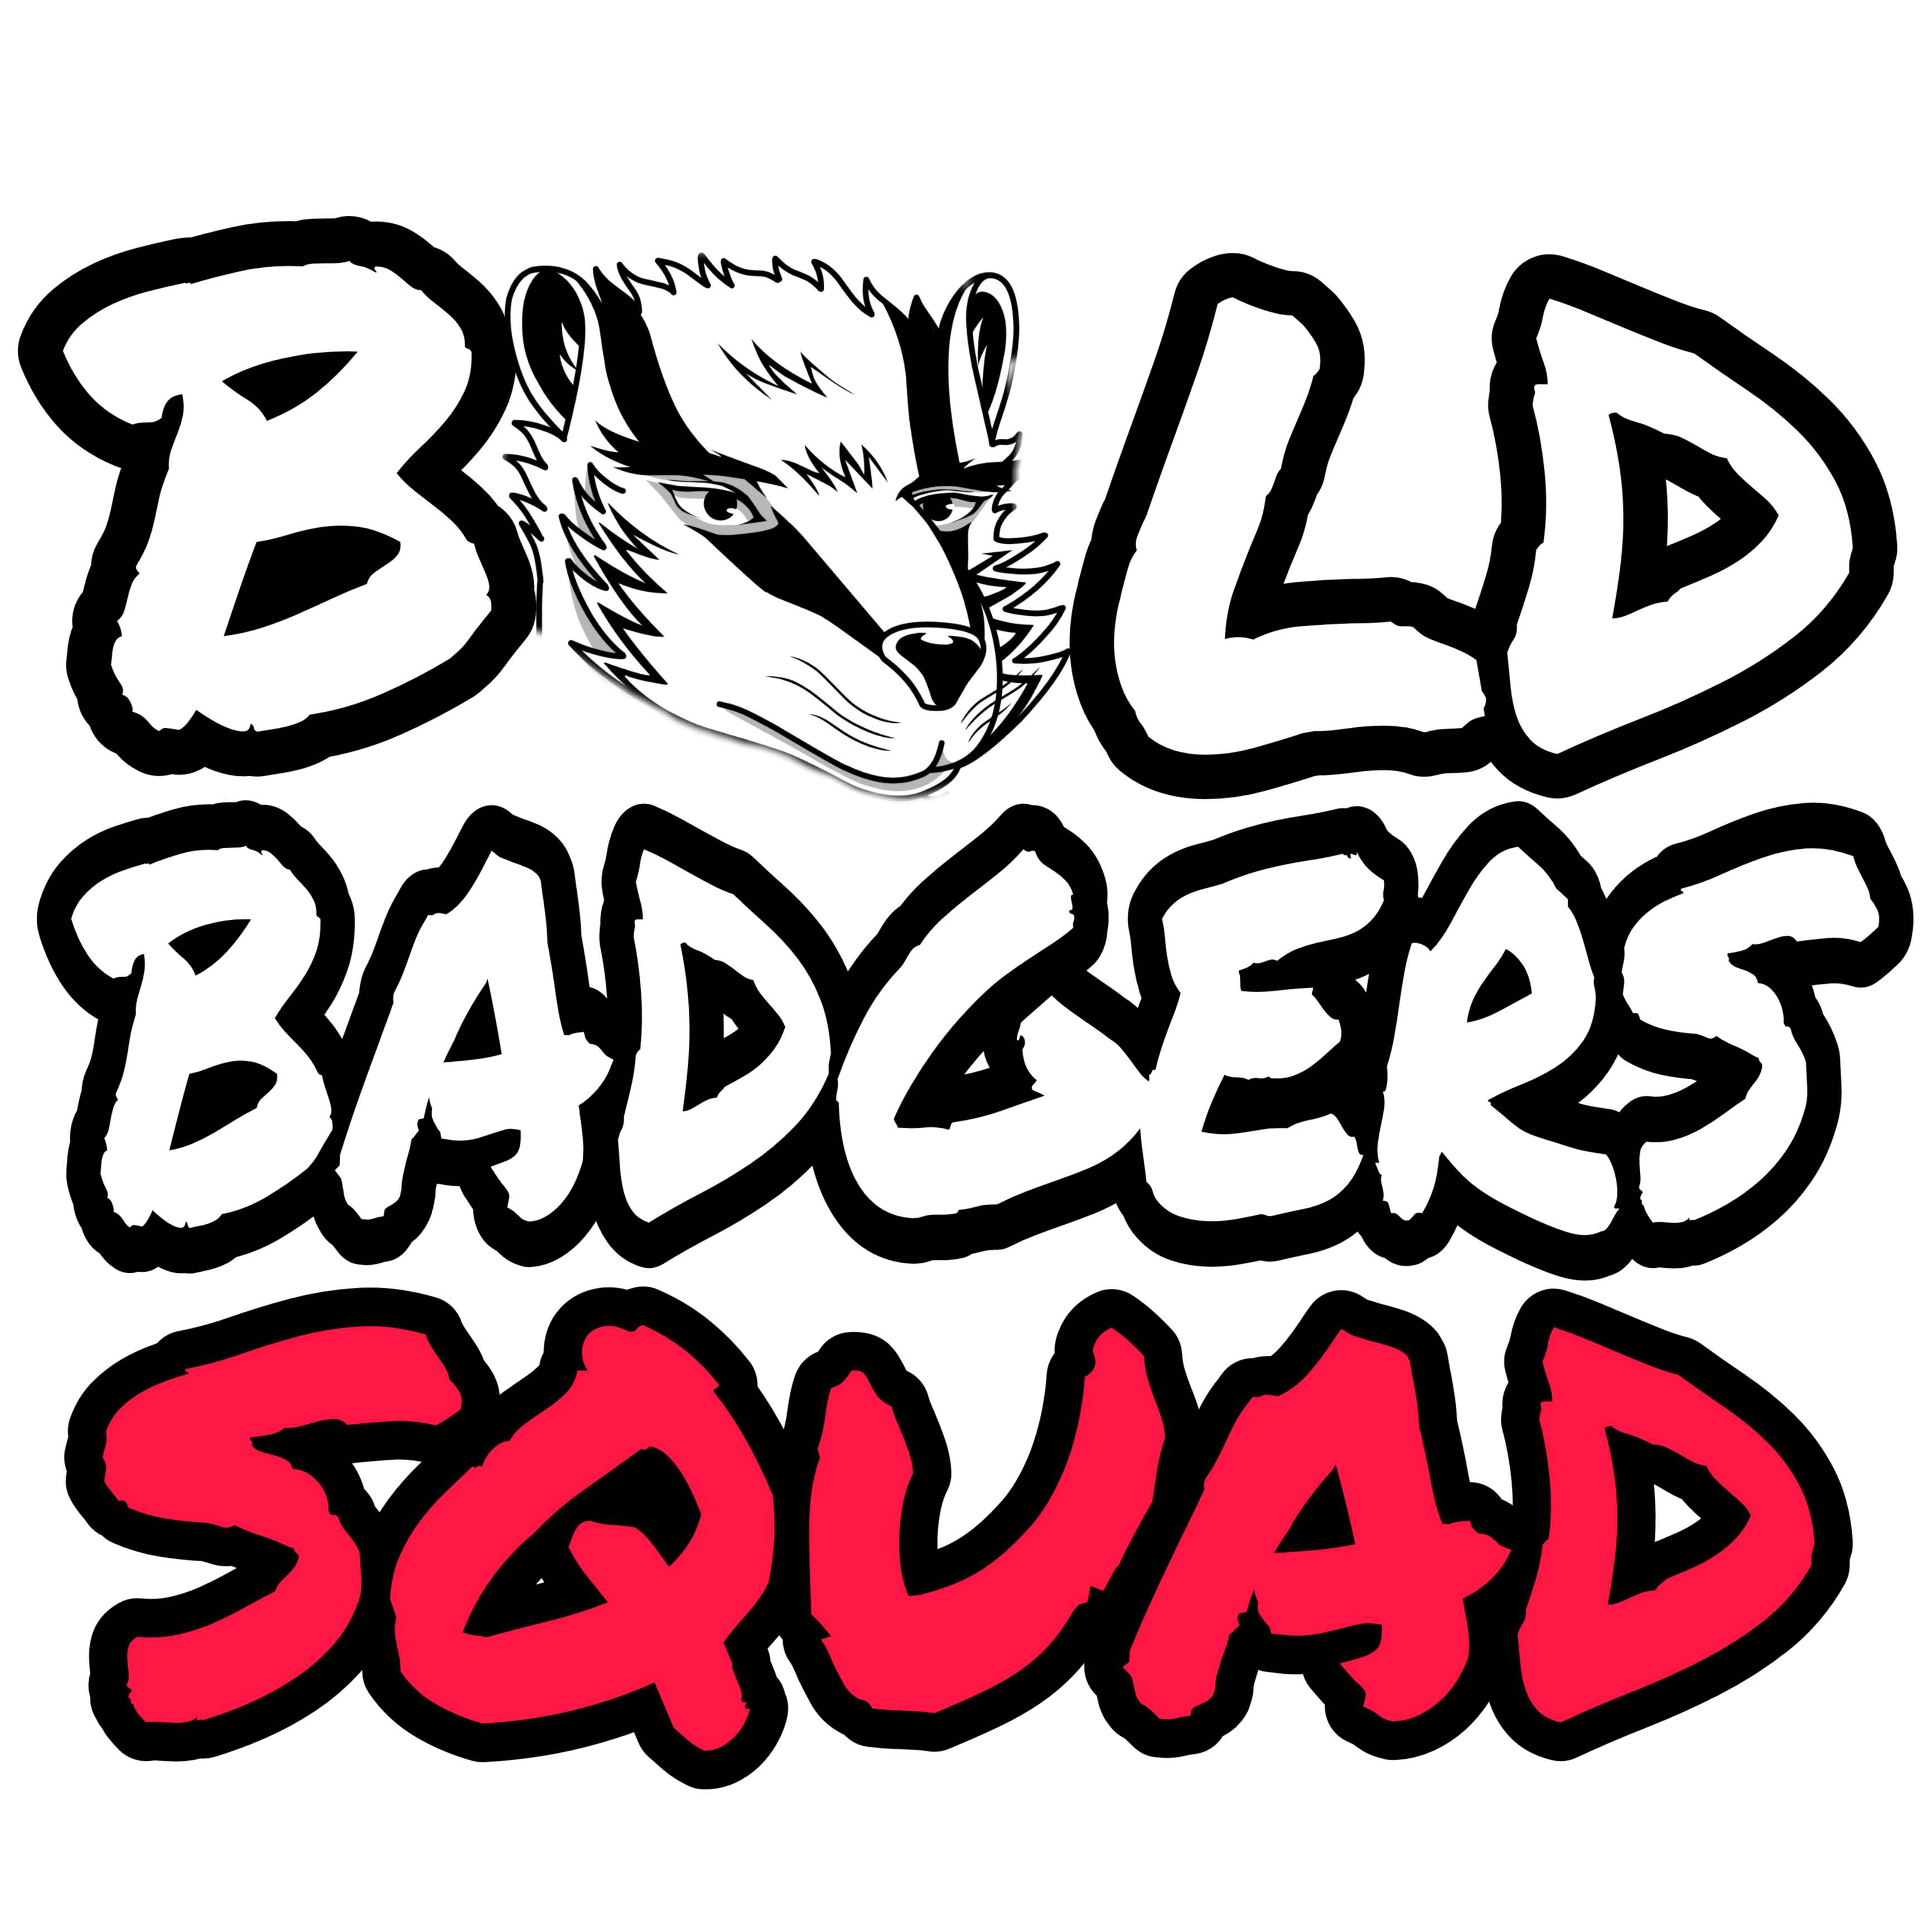 Bold Badgers